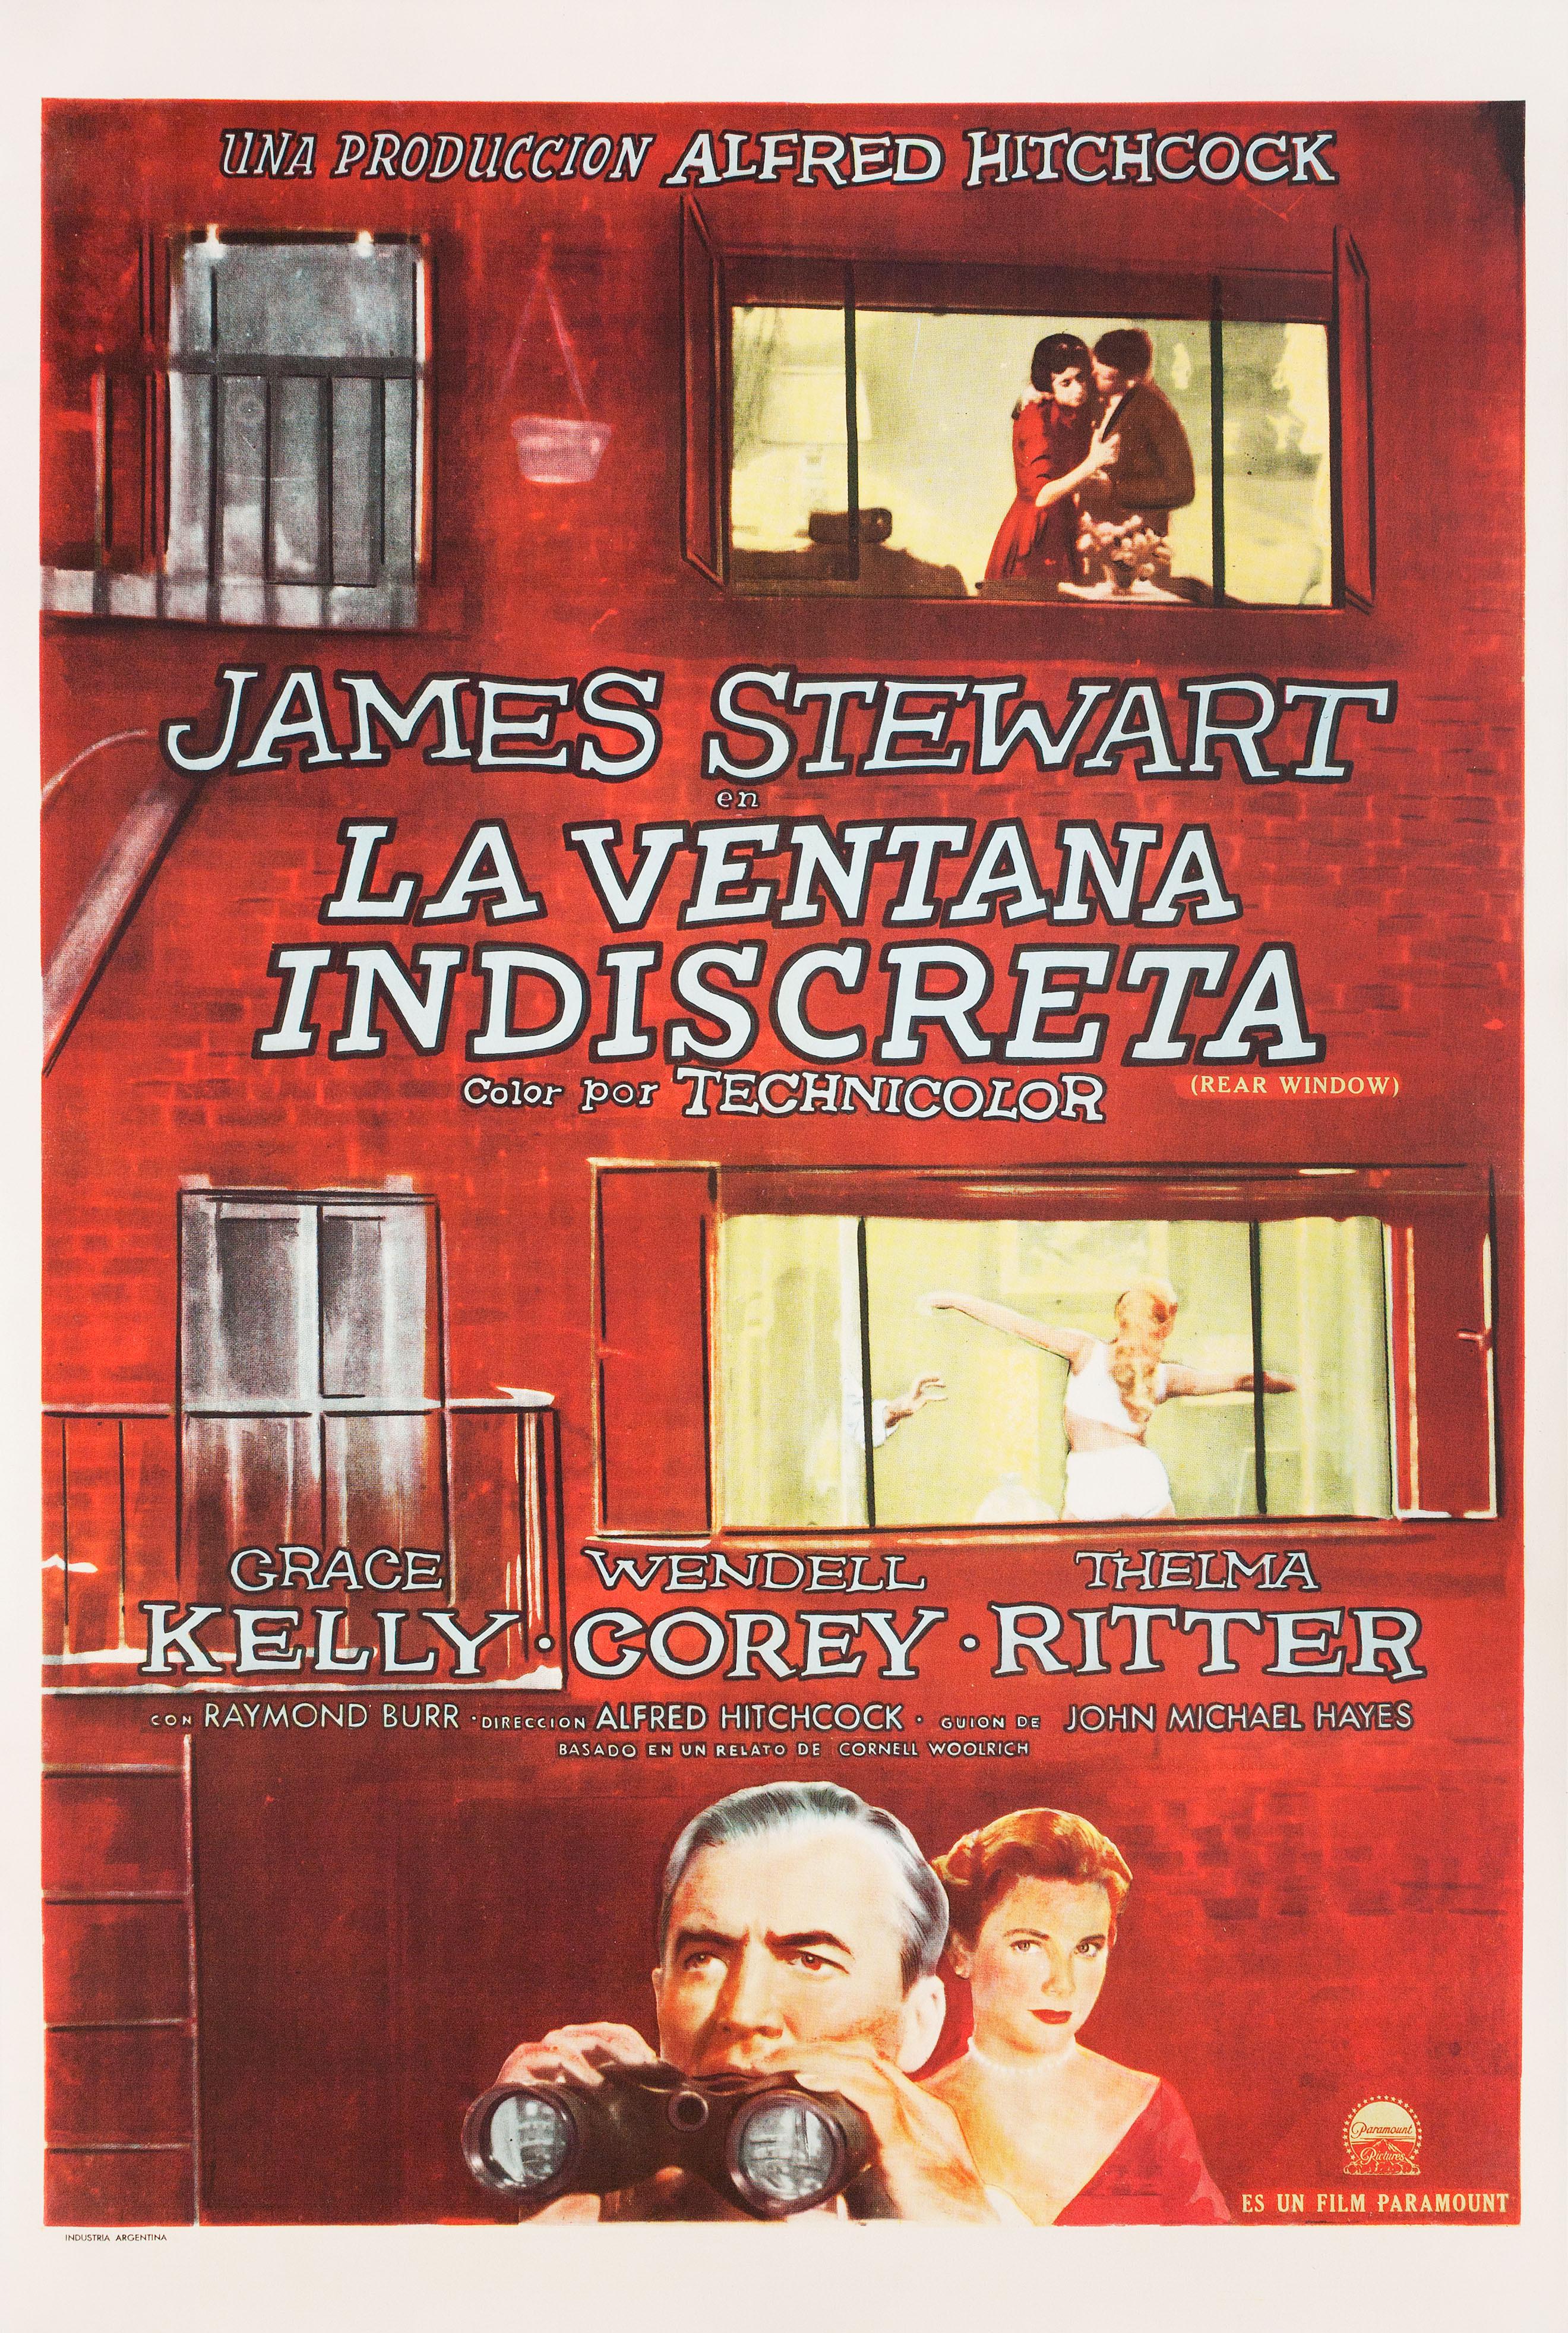 Original 1954 Argentine poster for the film Rear Window directed by Alfred Hitchcock with James Stewart / Grace Kelly / Wendell Corey / Thelma Ritter. Fine condition, linen-backed. This poster has been professionally linen-backed. Please note: the